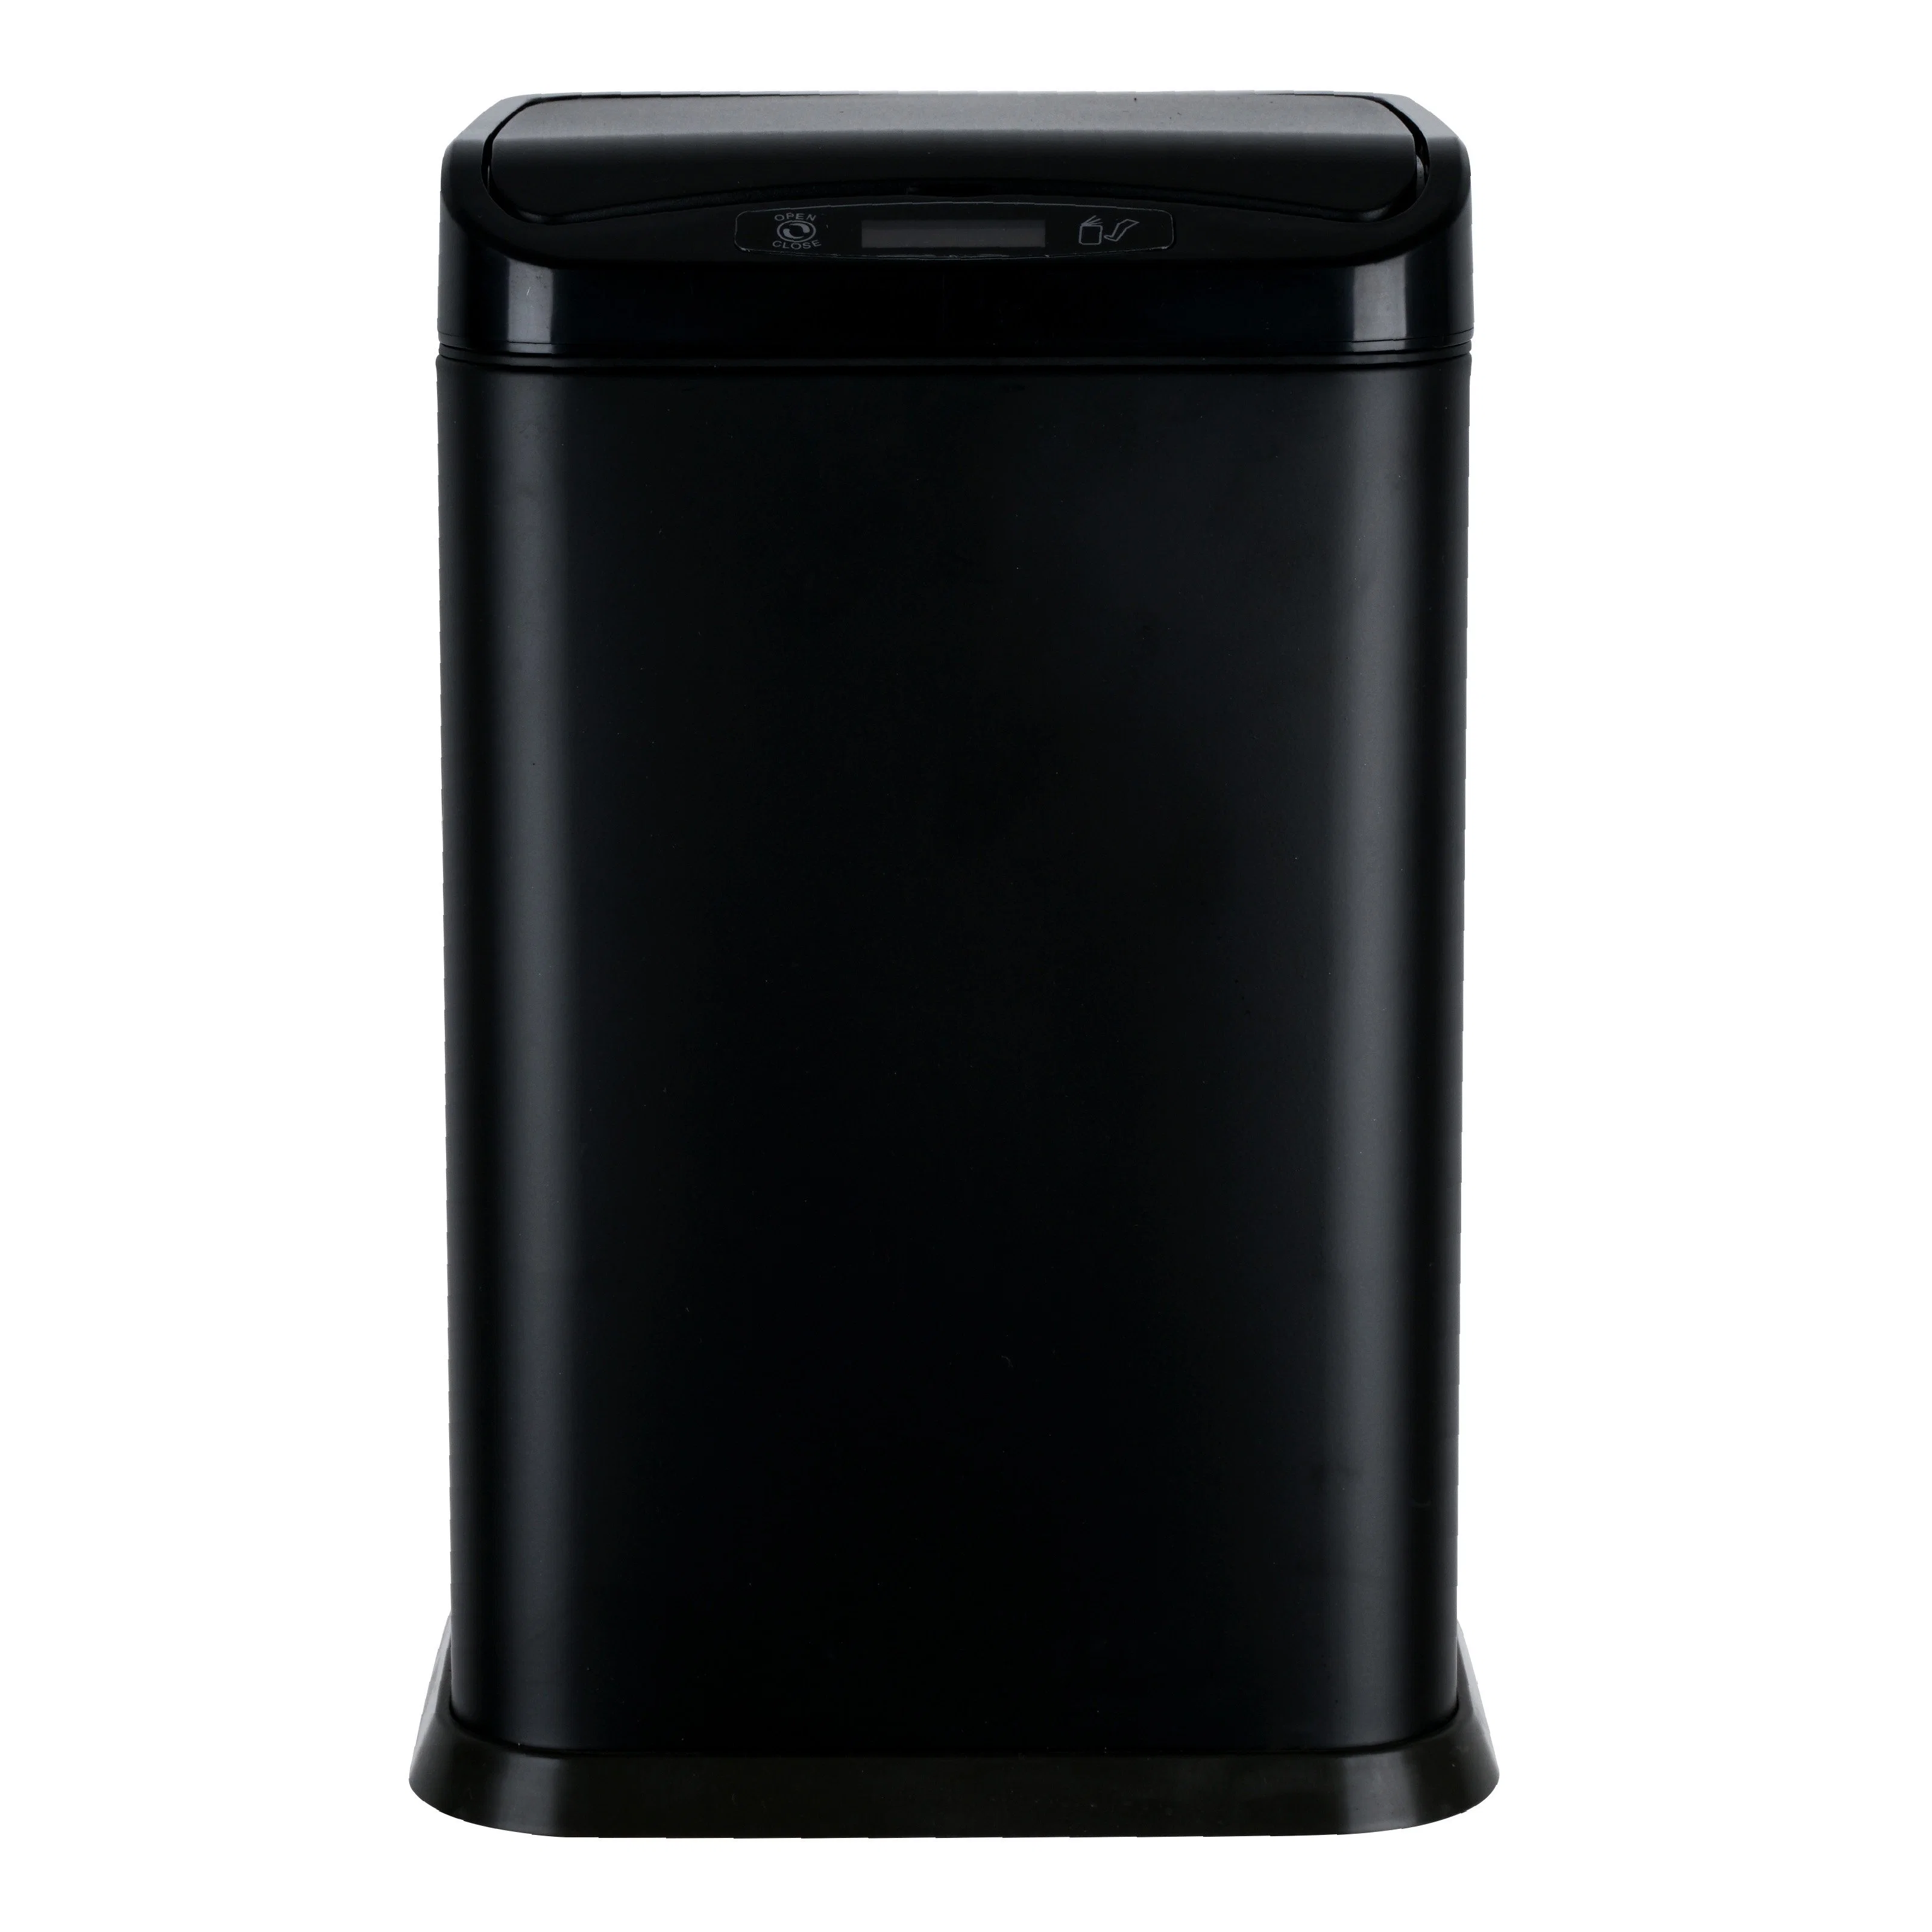 Yunzhe Recycling 1PC/Polybag/Shaped Foam/Mail Box Automatic Sensor Dustbin Household Garbage Can